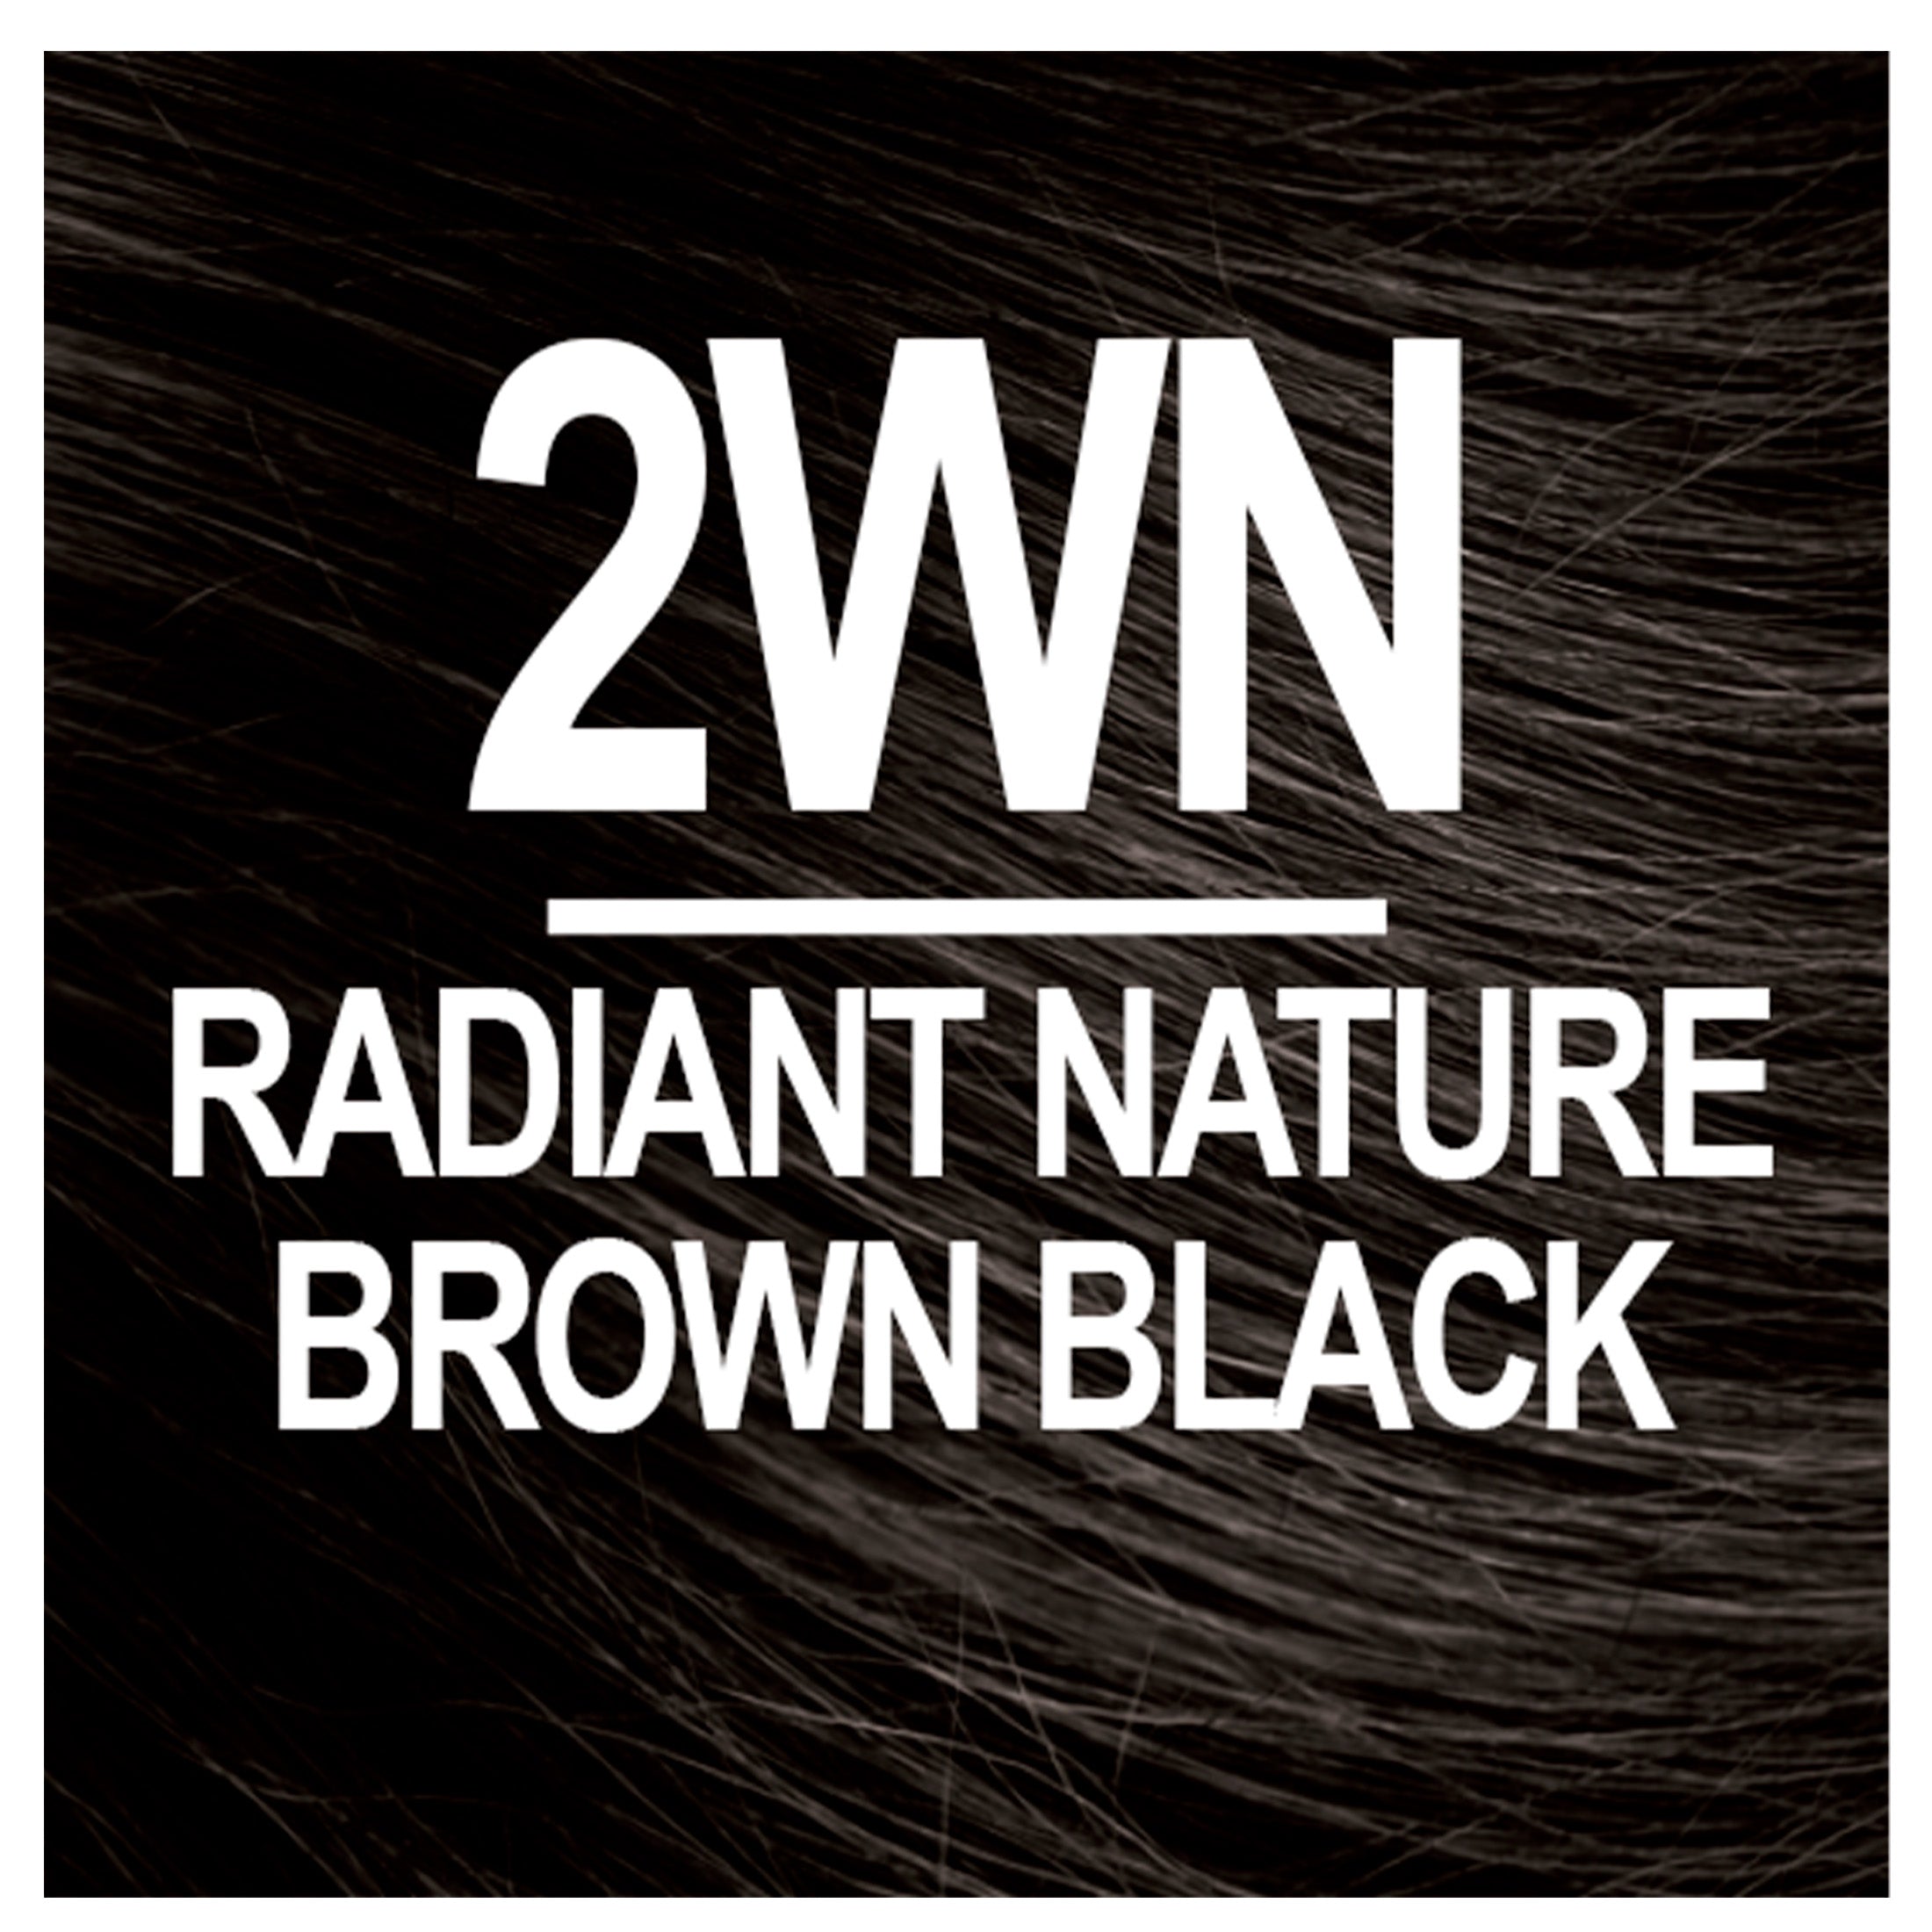 Naturtint Permanent Hair Color 2WN Radiant Nature Brown Black - image 2 of 5